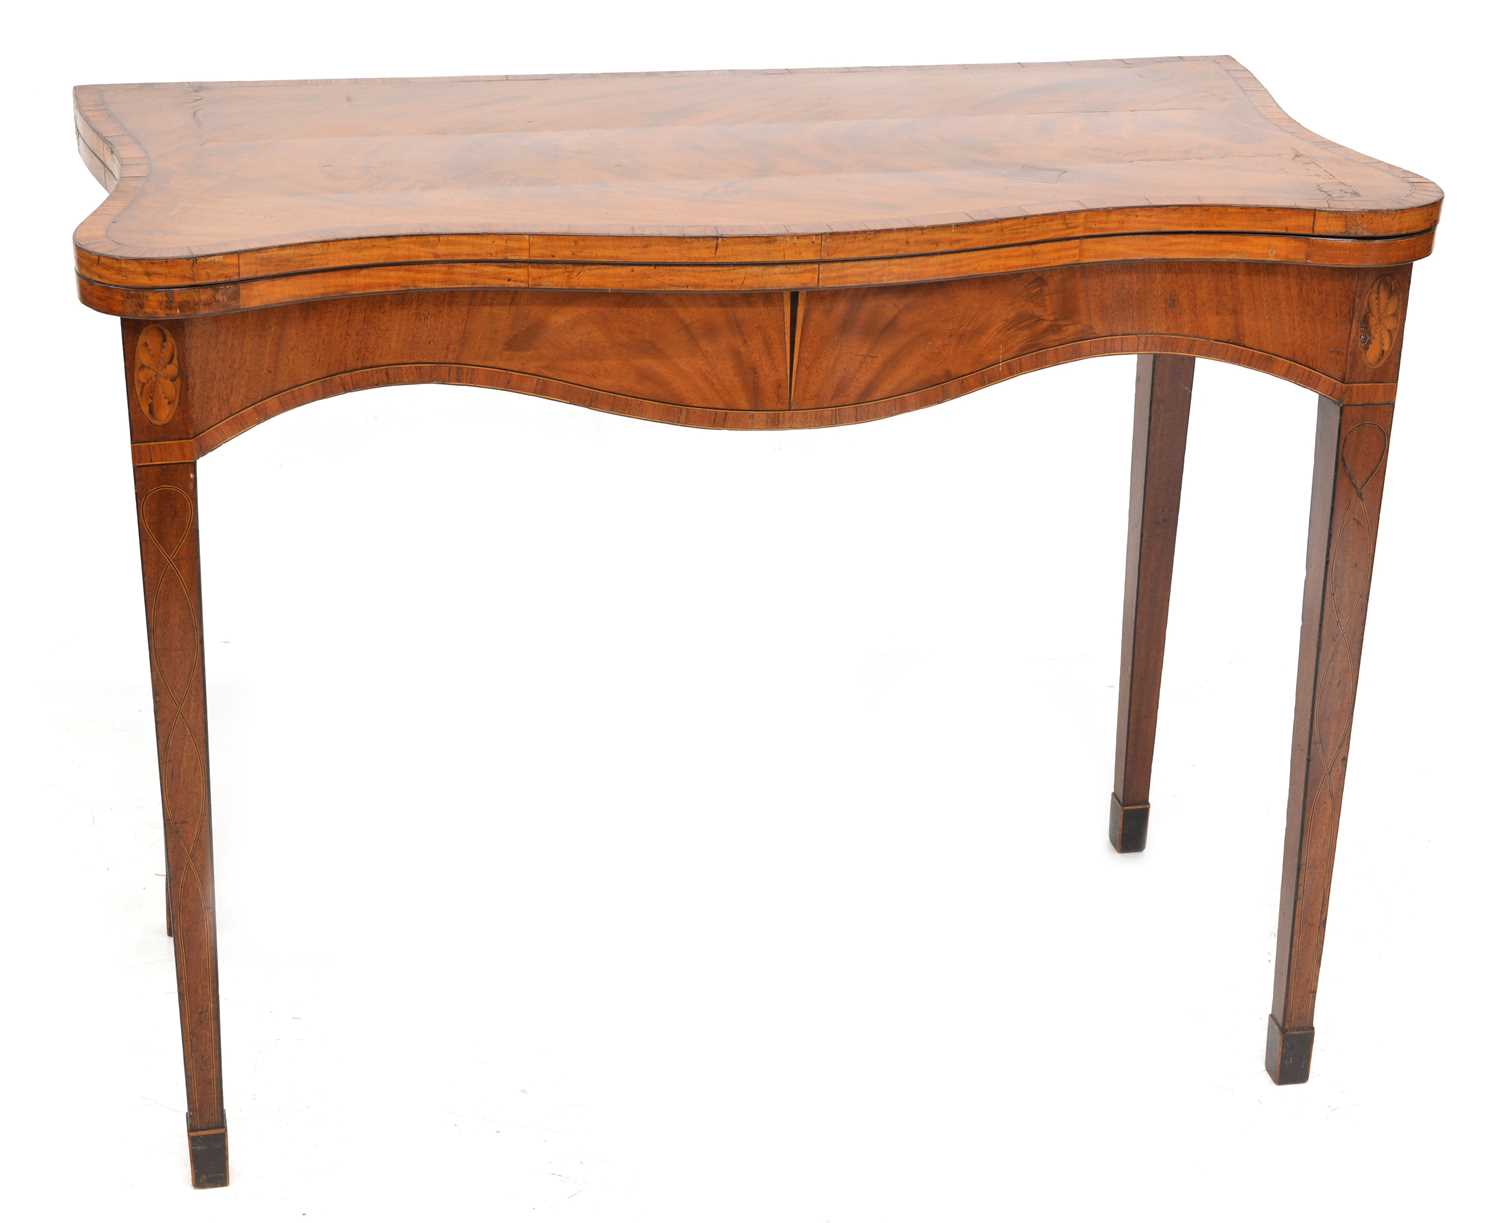 Early 19th-century fold-over card table